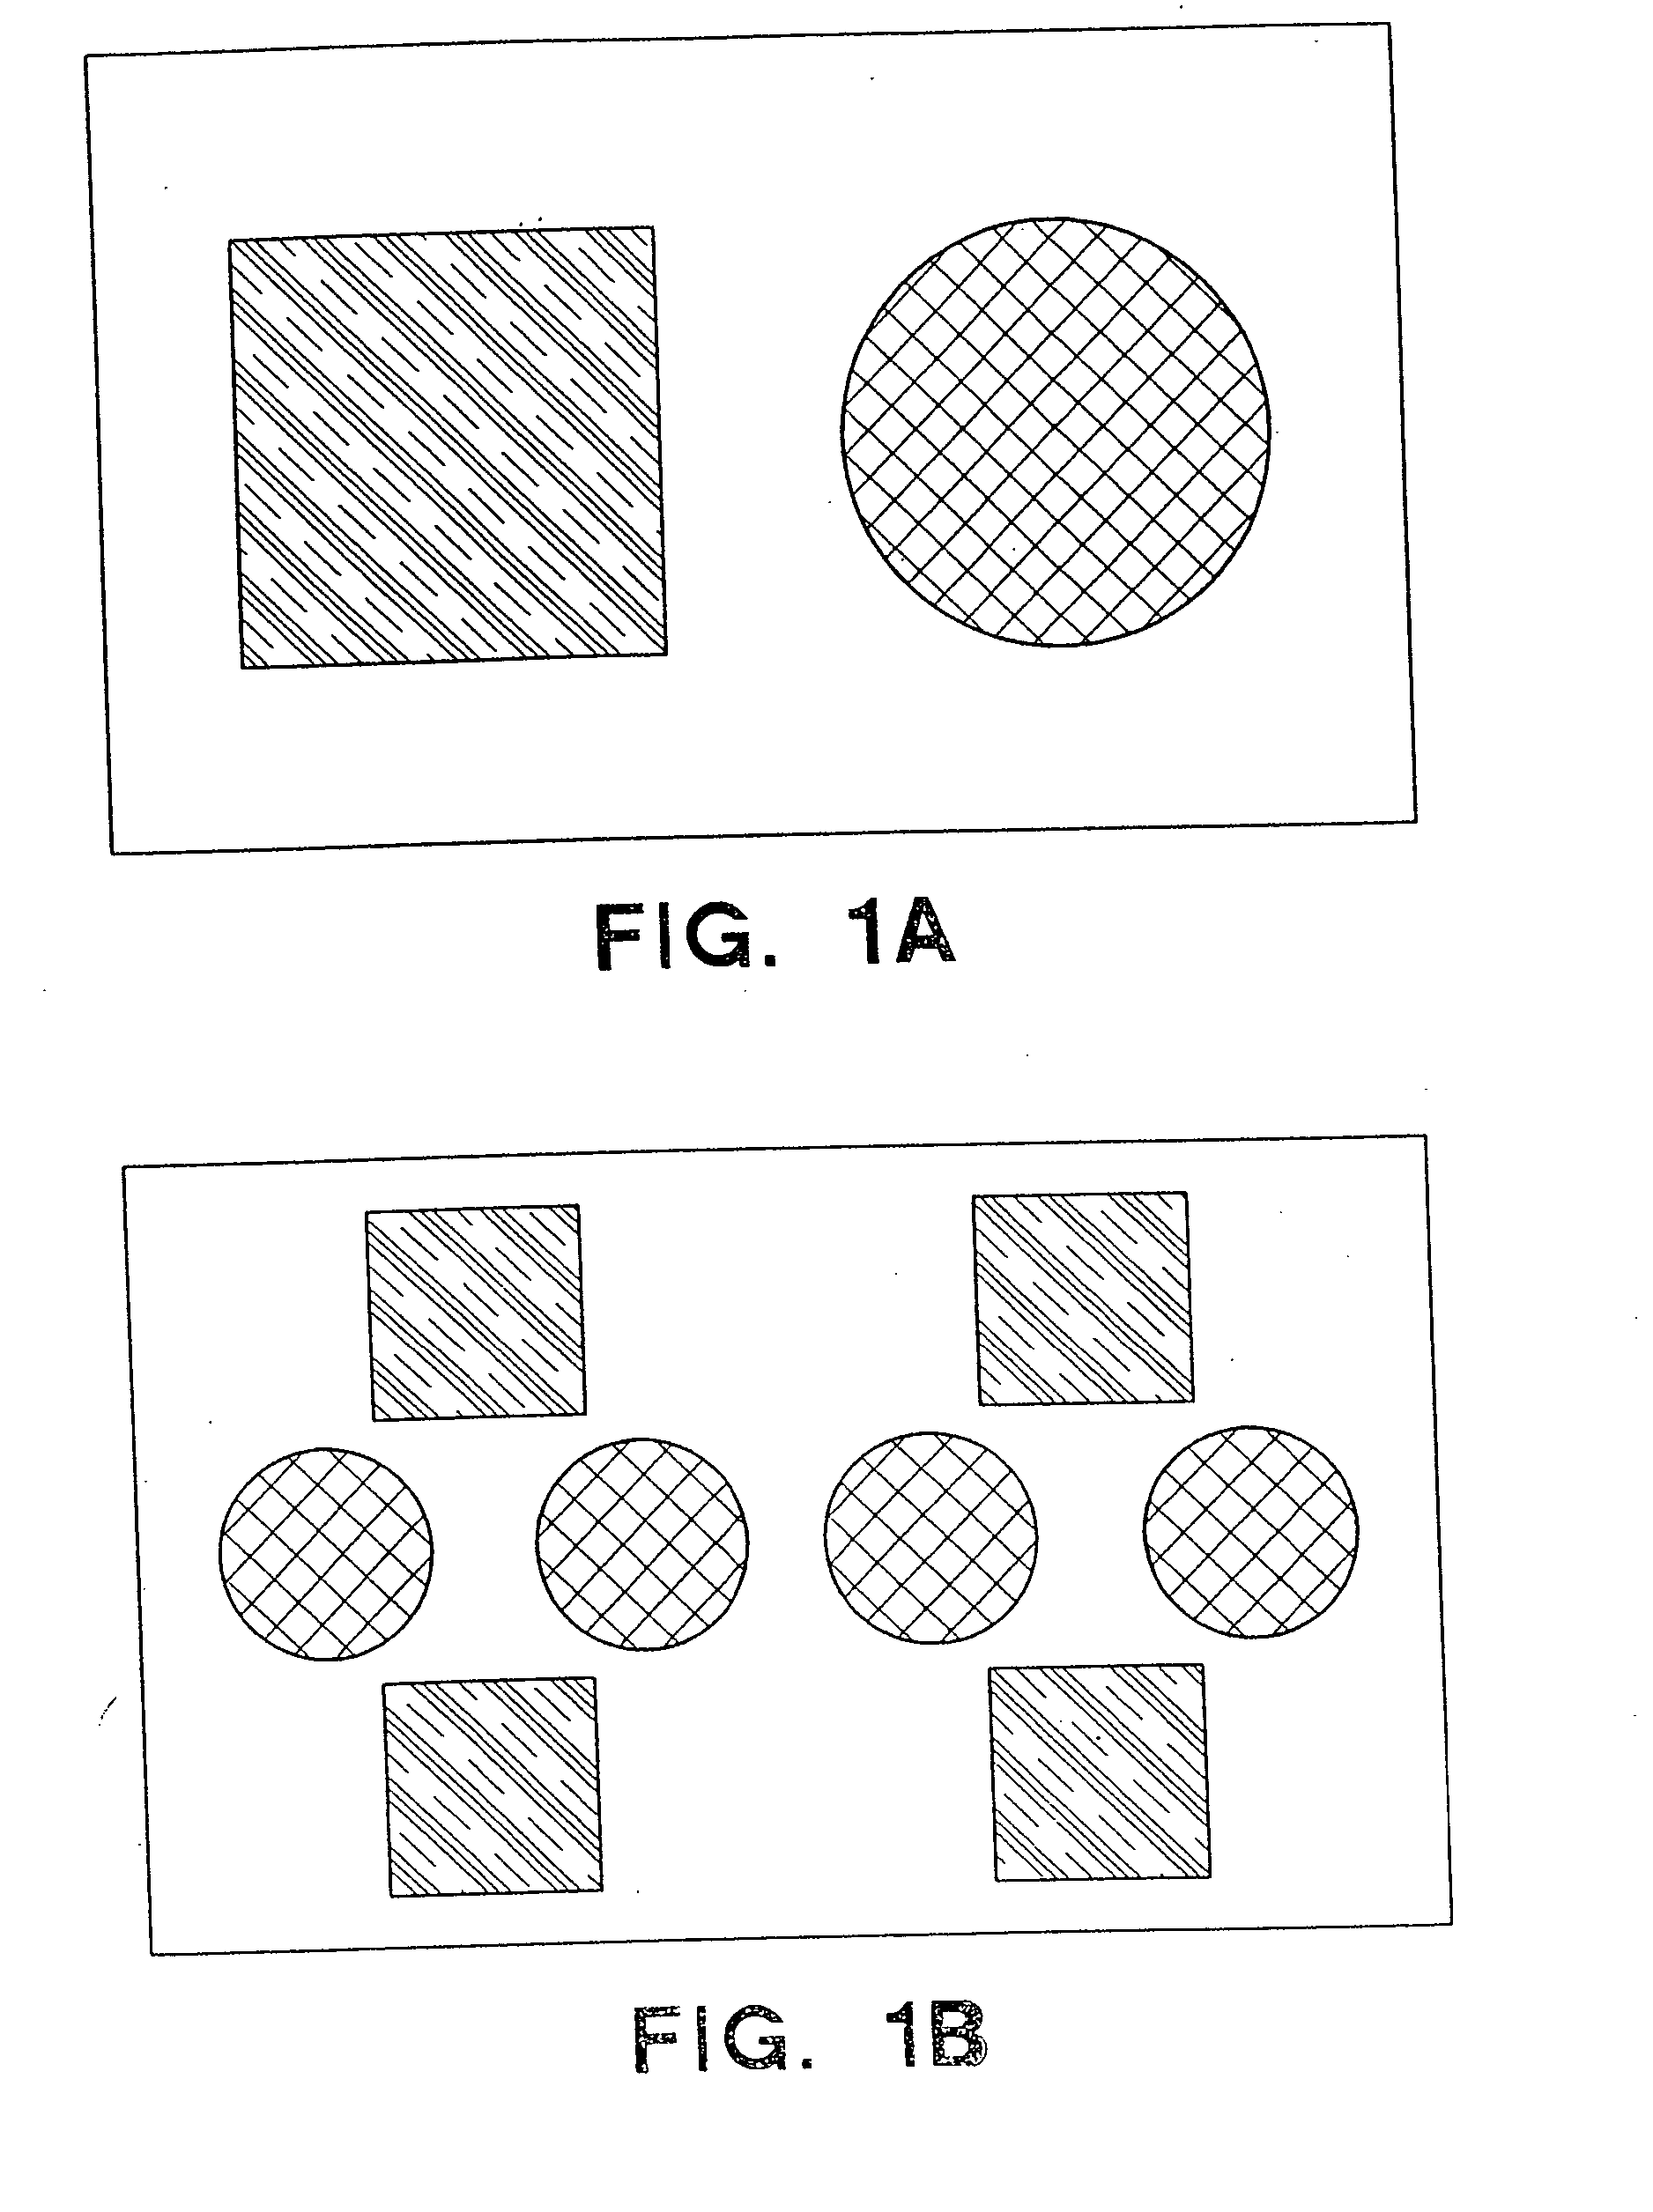 Method for image characterization using color and texture statistics with embedded spatial information